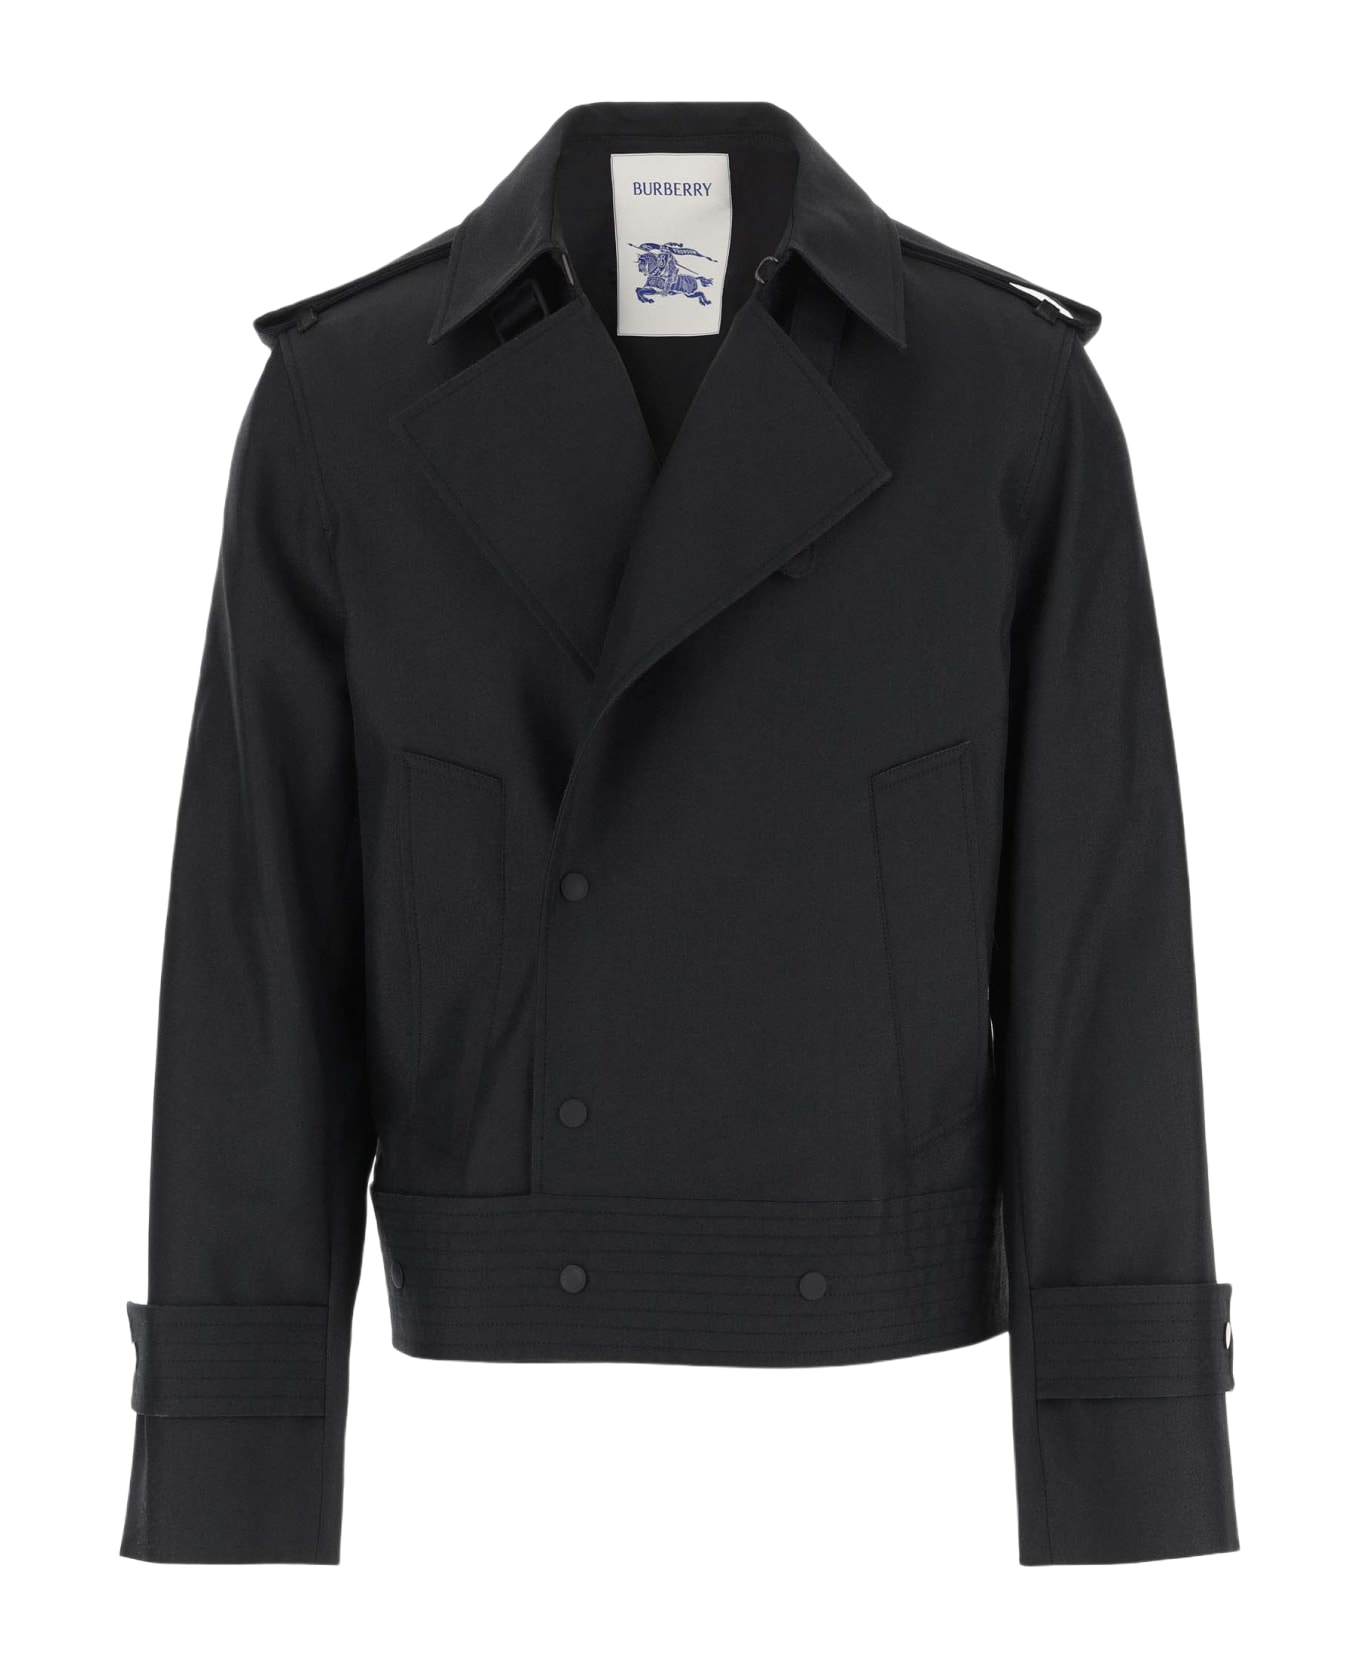 Burberry Silk Blend Trench Jacket - Black ブレザー